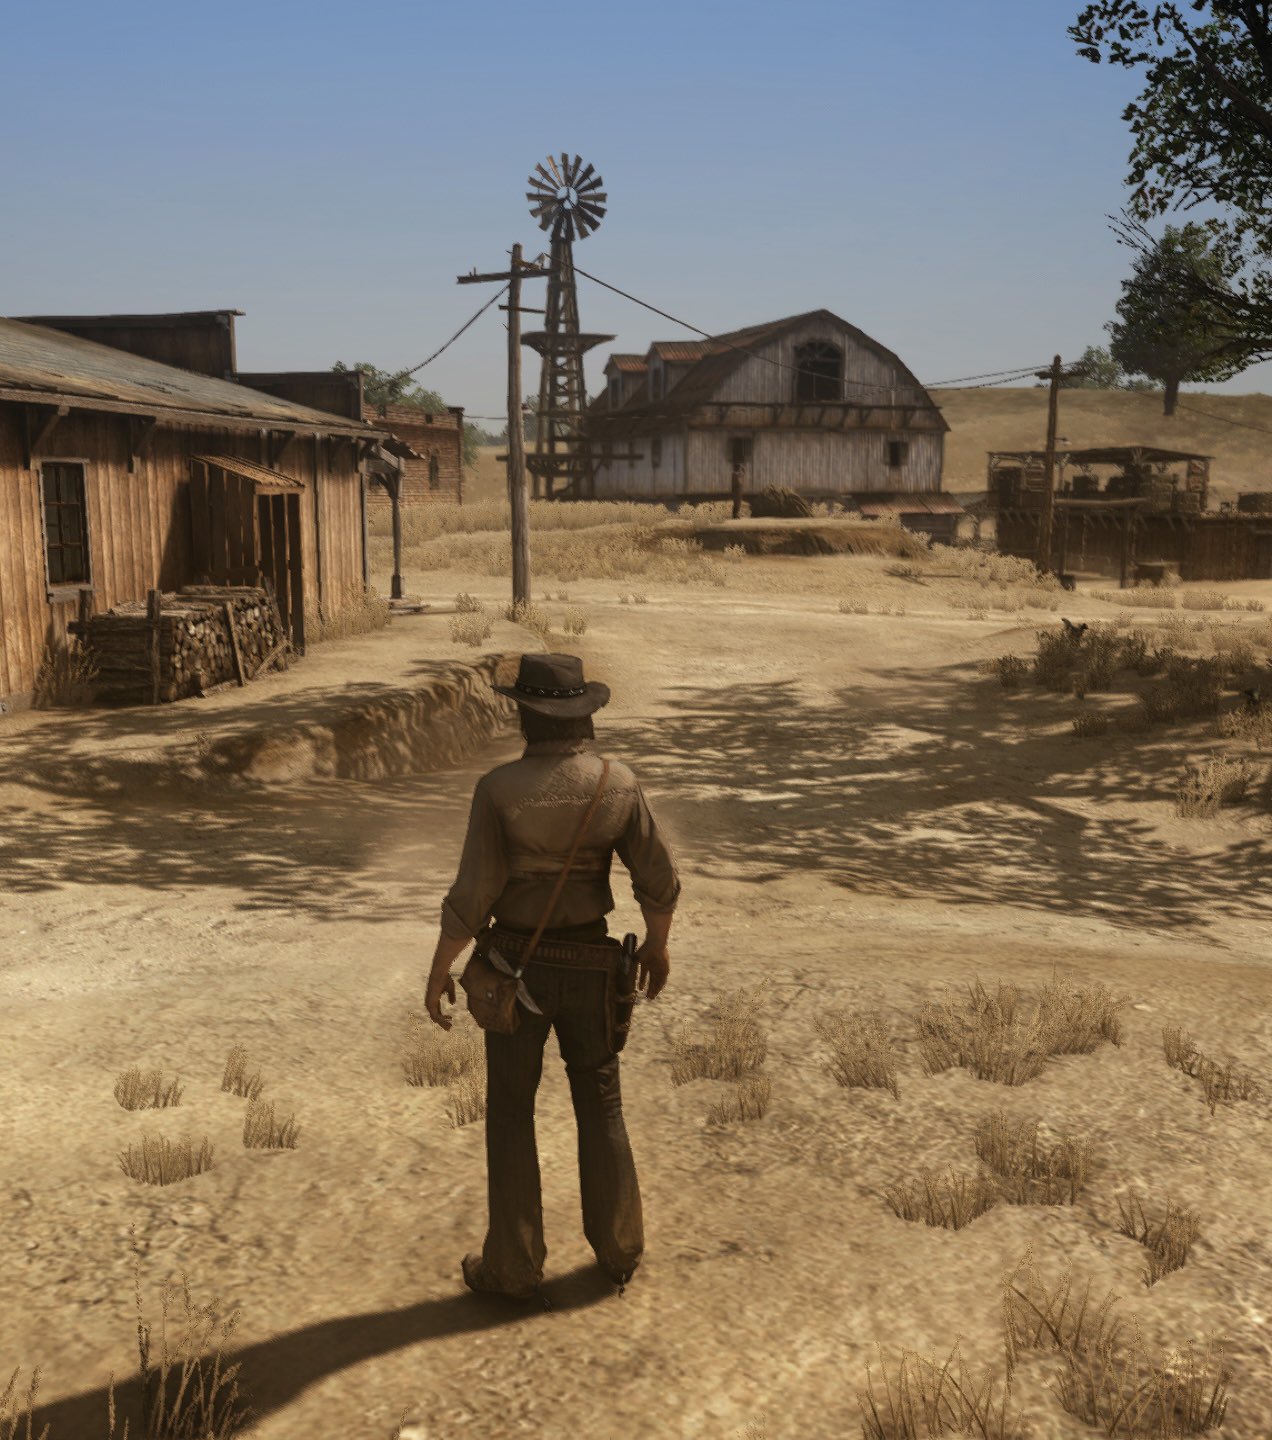 Paranafloden mave killing Red Dead Redemption Remastered 🍥 on Twitter: "Thoughts? #RedDeadRedemption  #RedDead #RedDeadRedemption2 #RockstarGames #Videogame #RDR #PS3  #PlayStation #PC #gaming #PCGaming #graphics #mods #60fps  https://t.co/EaXQVl4vgf" / Twitter